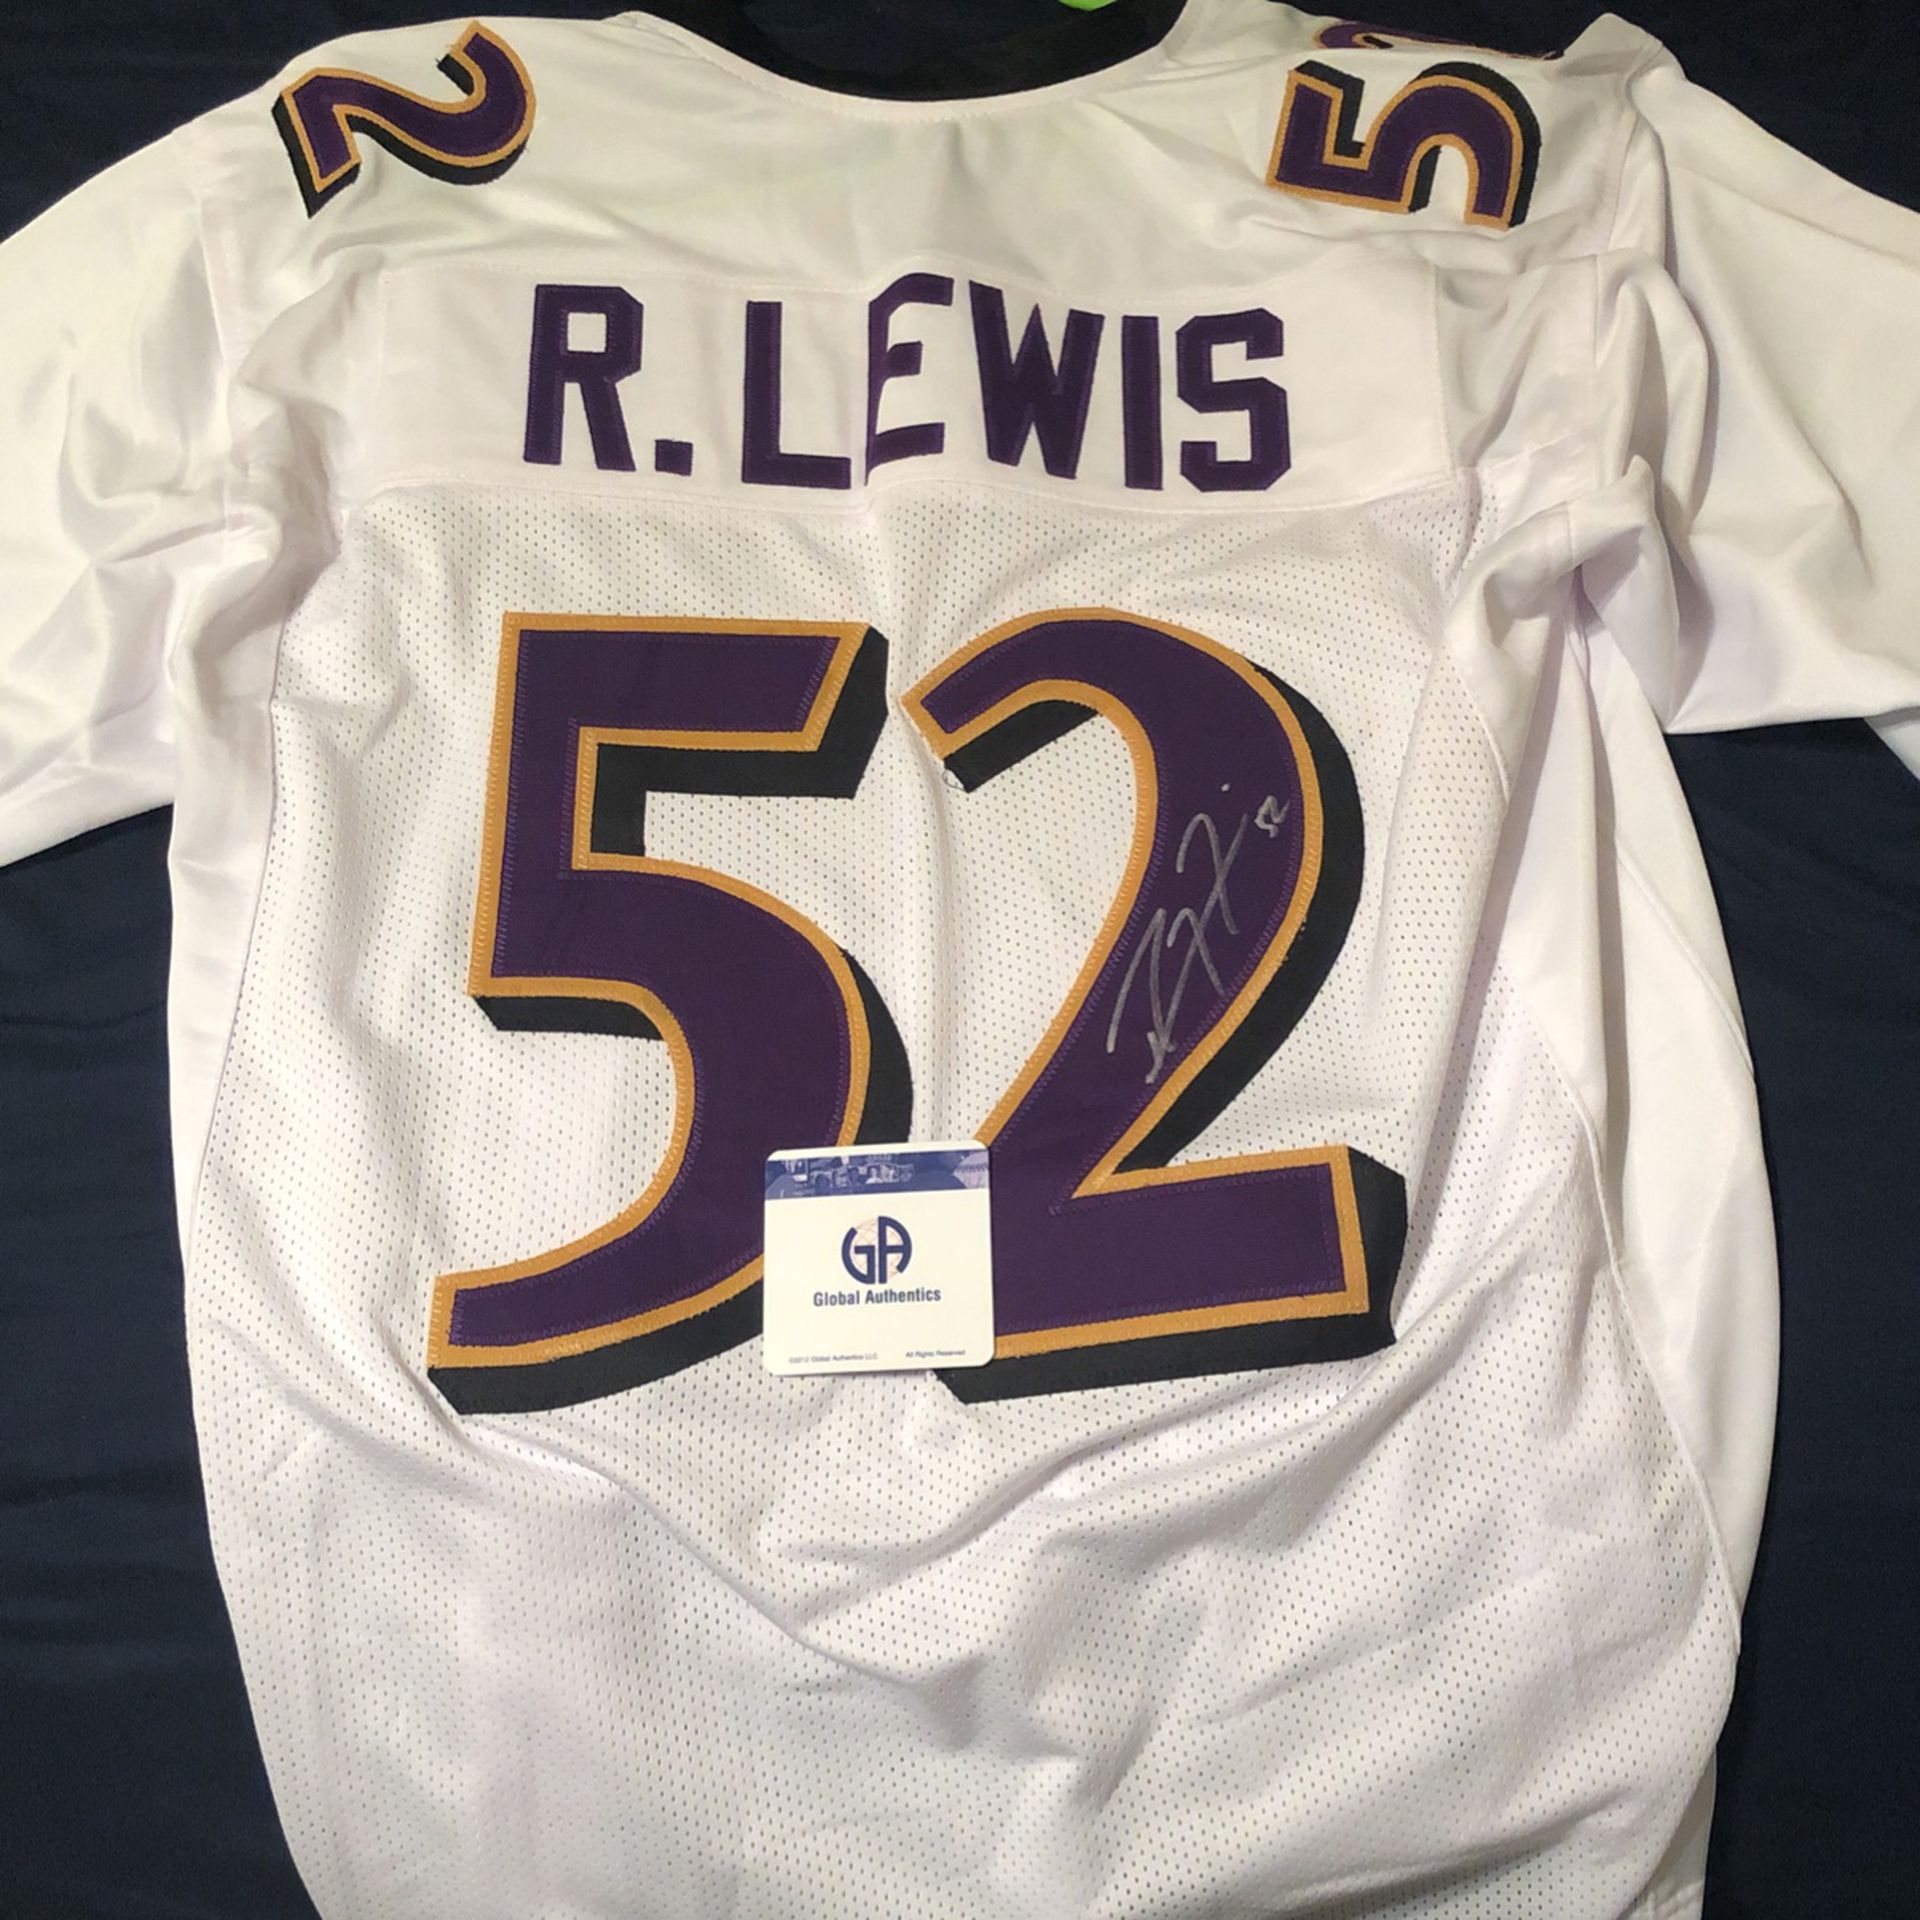 Autographed Ray Lewis Jersey for Sale in New Melle, MO - OfferUp